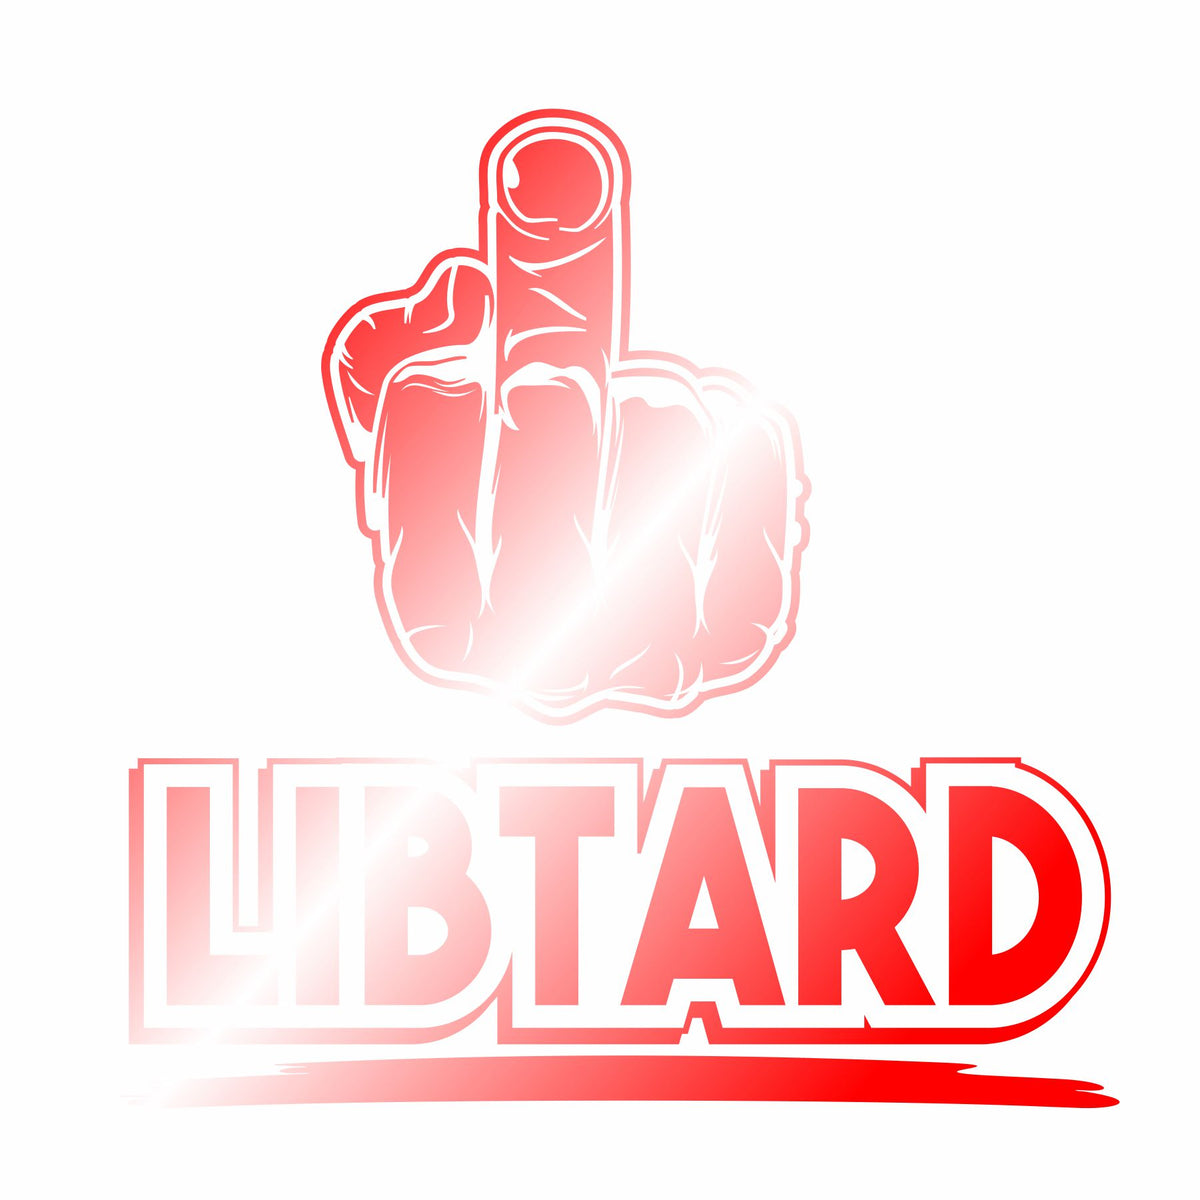 The Middle Finger - Libtard - Vinyl Decal - Free Shipping